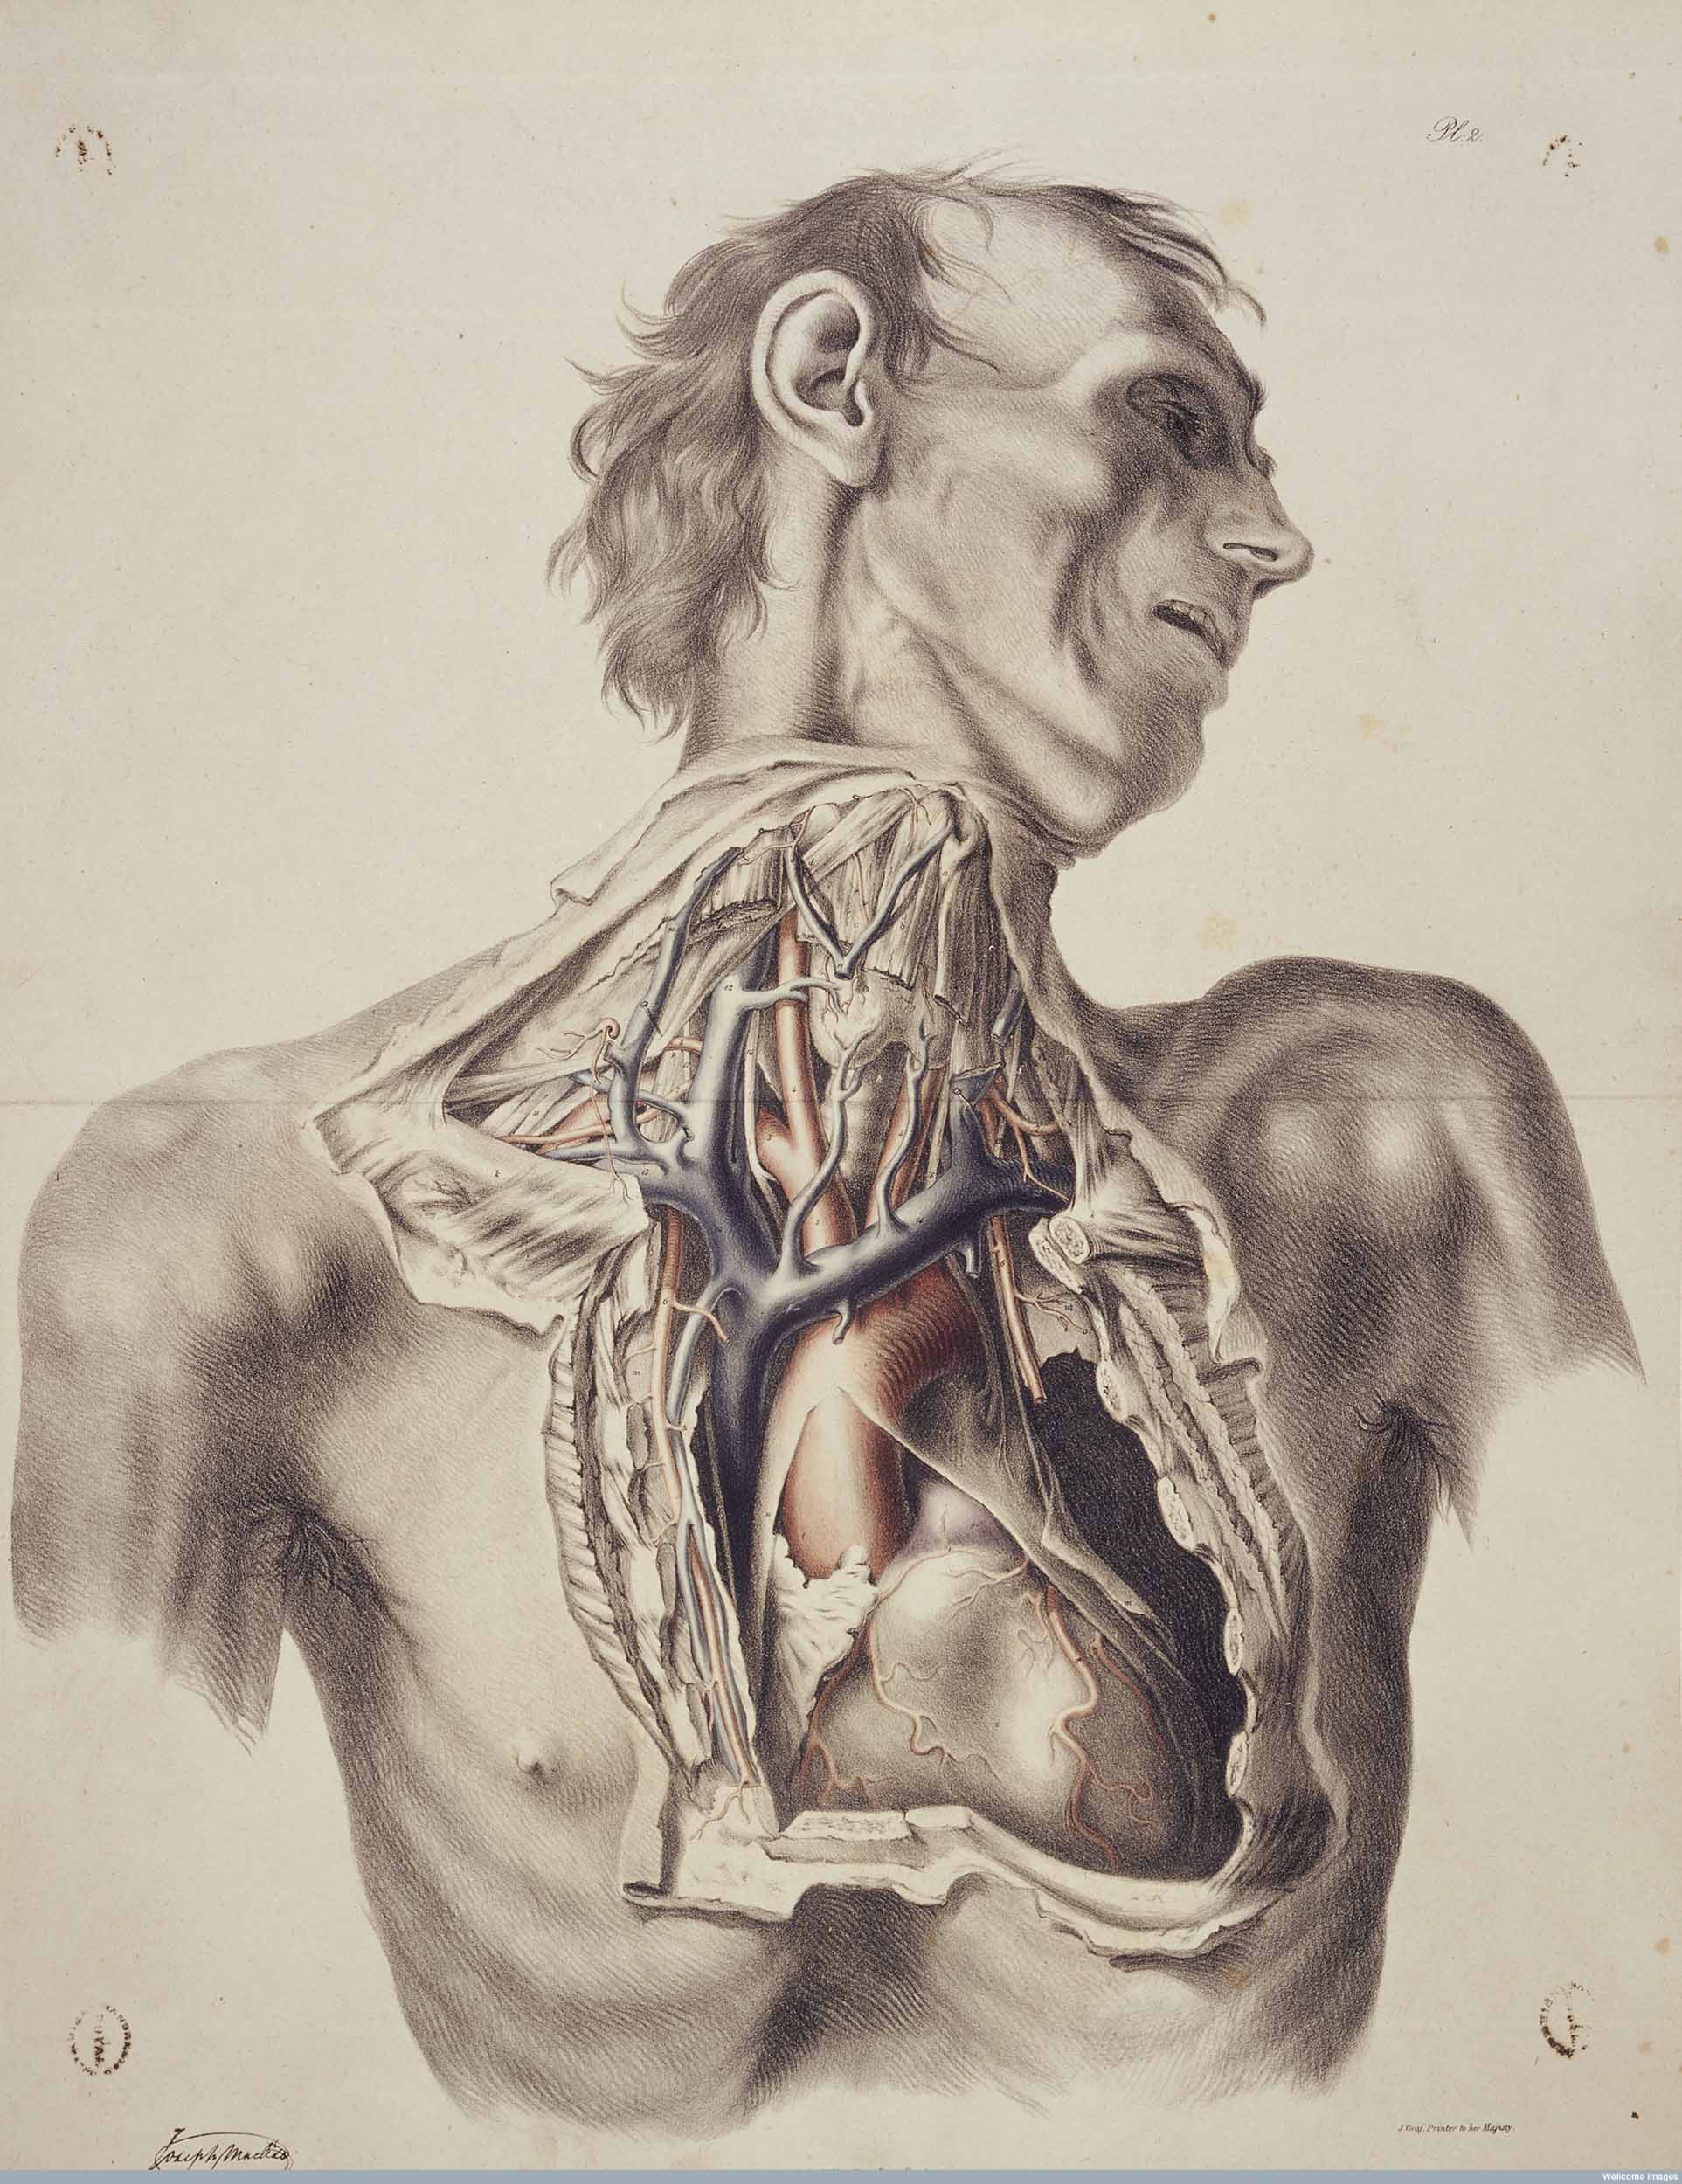 The large arteries of thorax and neck. Copyright Wellcome Library, London. Creative Commons Attribution 4.0 International (https://creativecommons.org/licenses/by/4.0/).